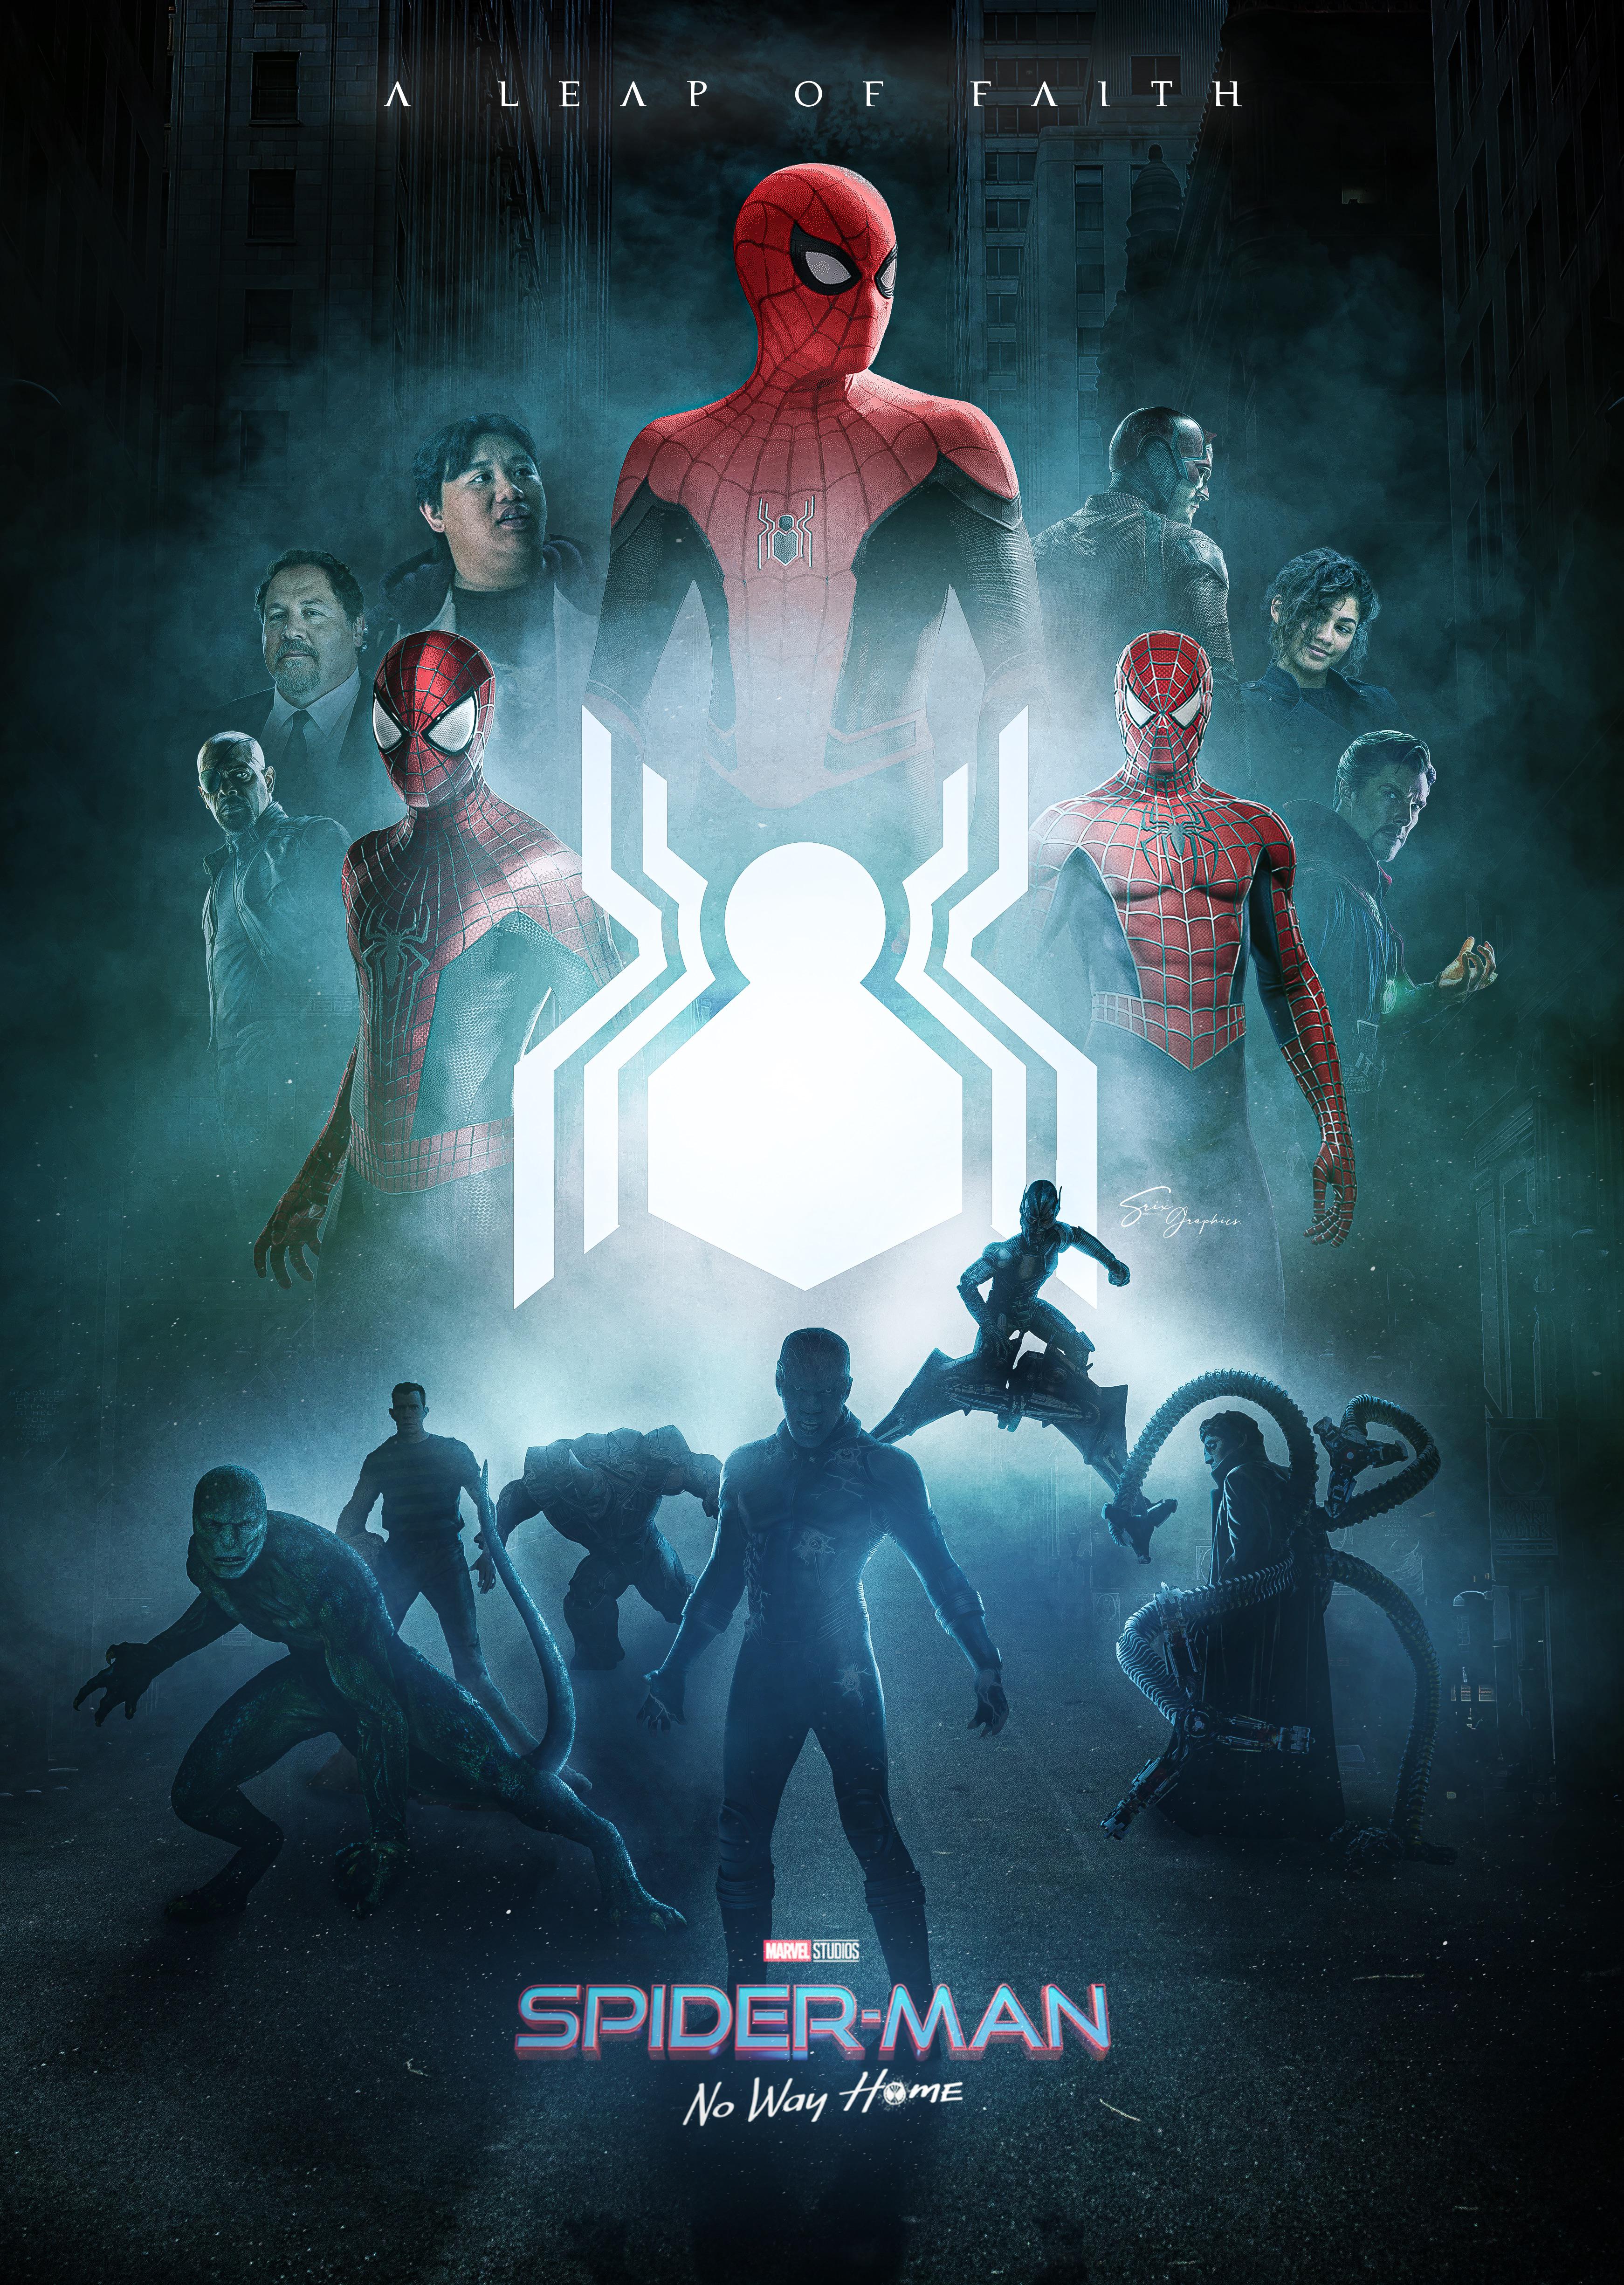 Spider Man NWH Fan Poster! By me